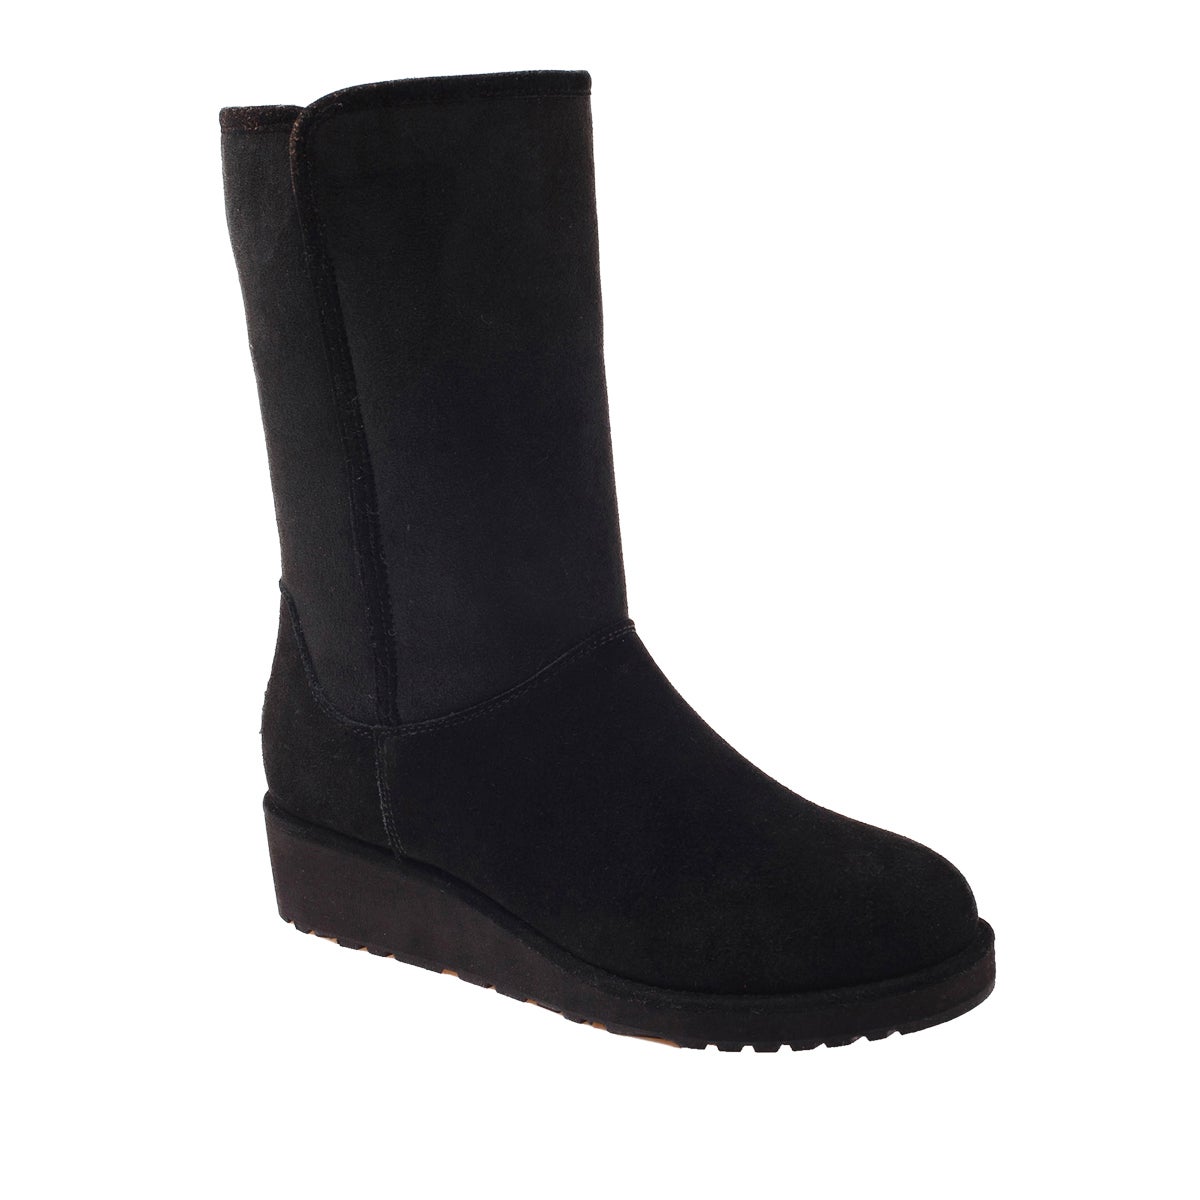 Ugg Mia Classic Slim Boots (Water Resistant) Ozwear Ugg